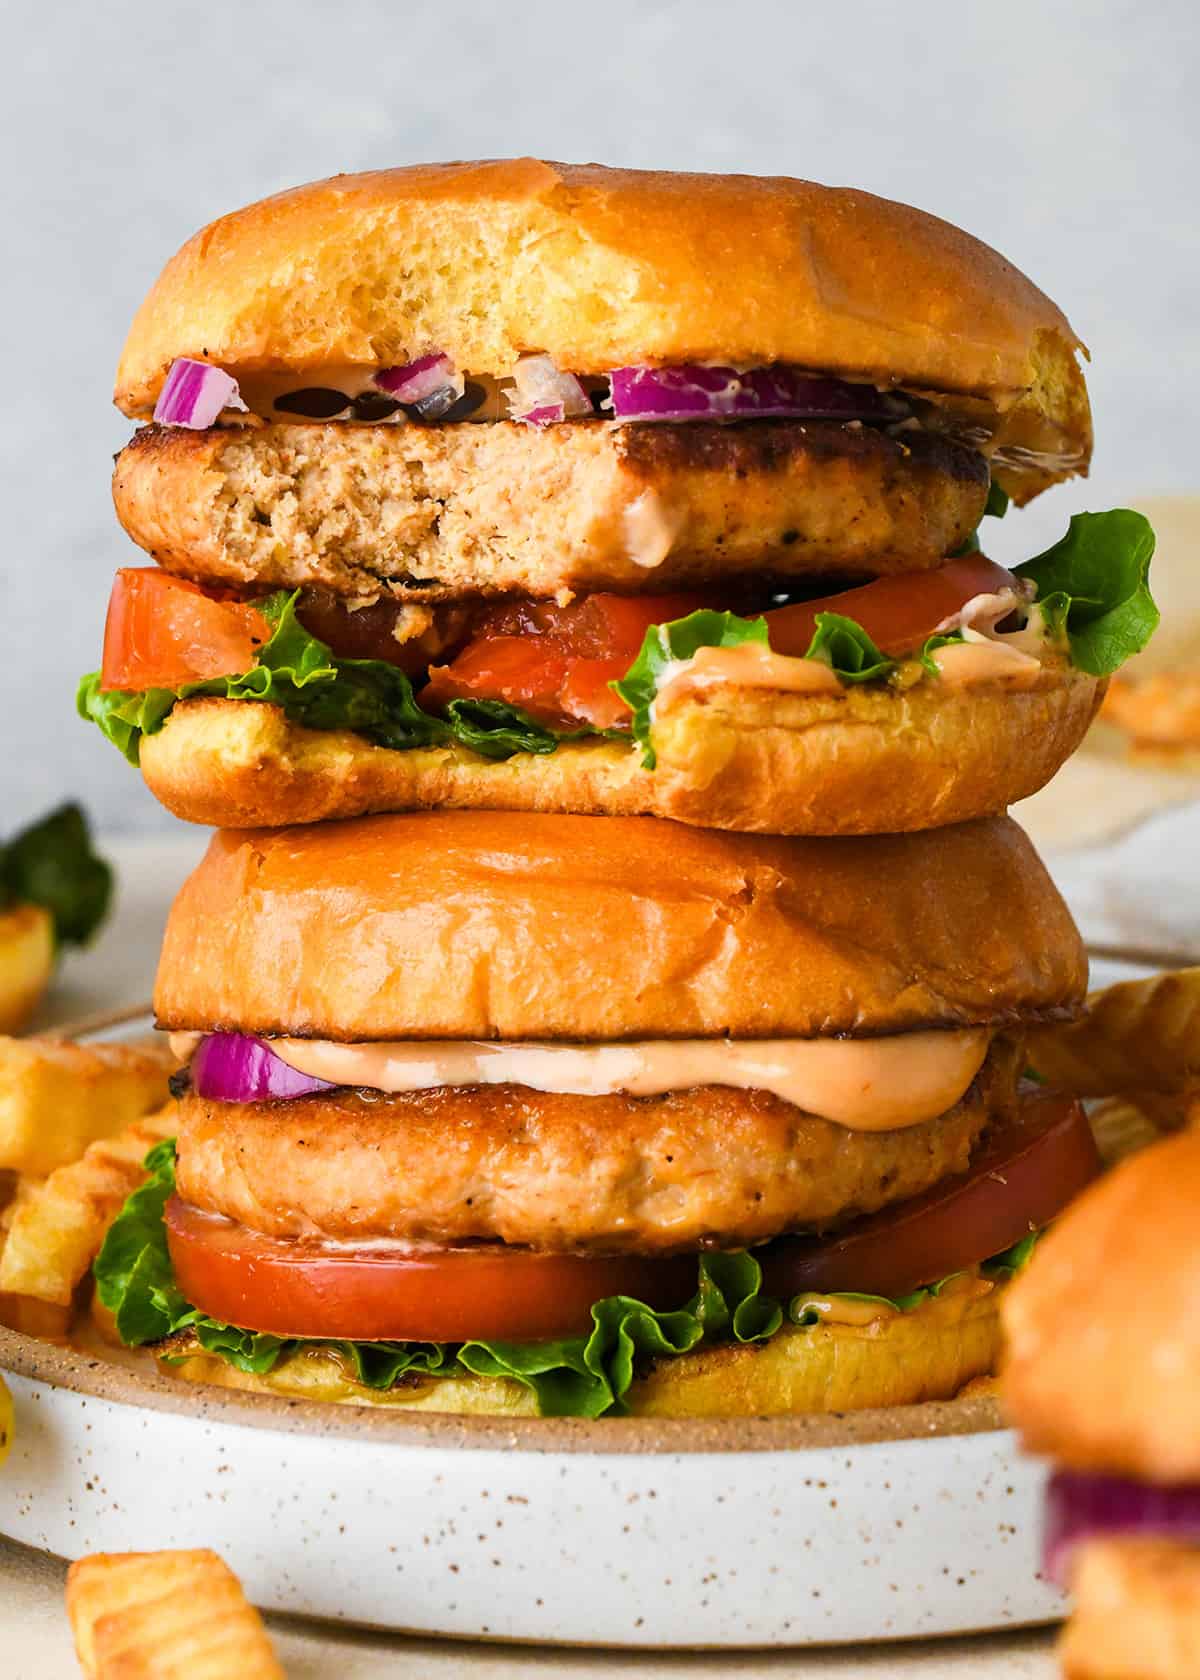 a stack of 2 Turkey Burgers on buns, the top one has a bite taken out of it